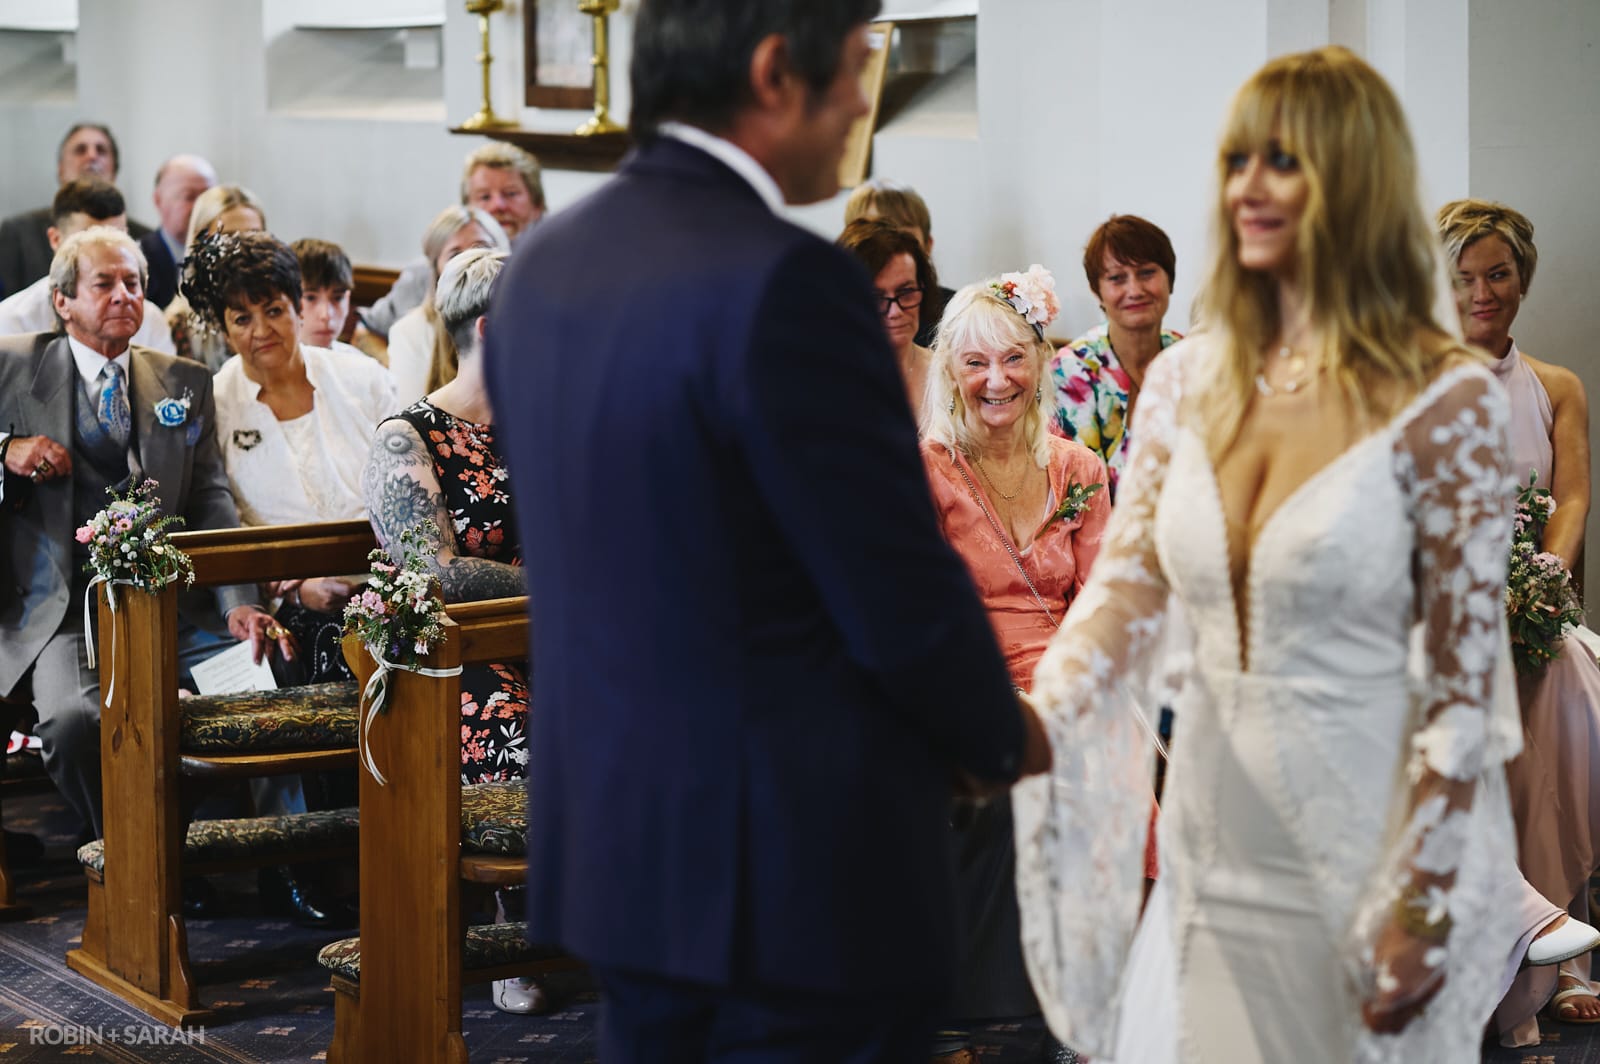 Family watch as bride and groom exchange wedding vows